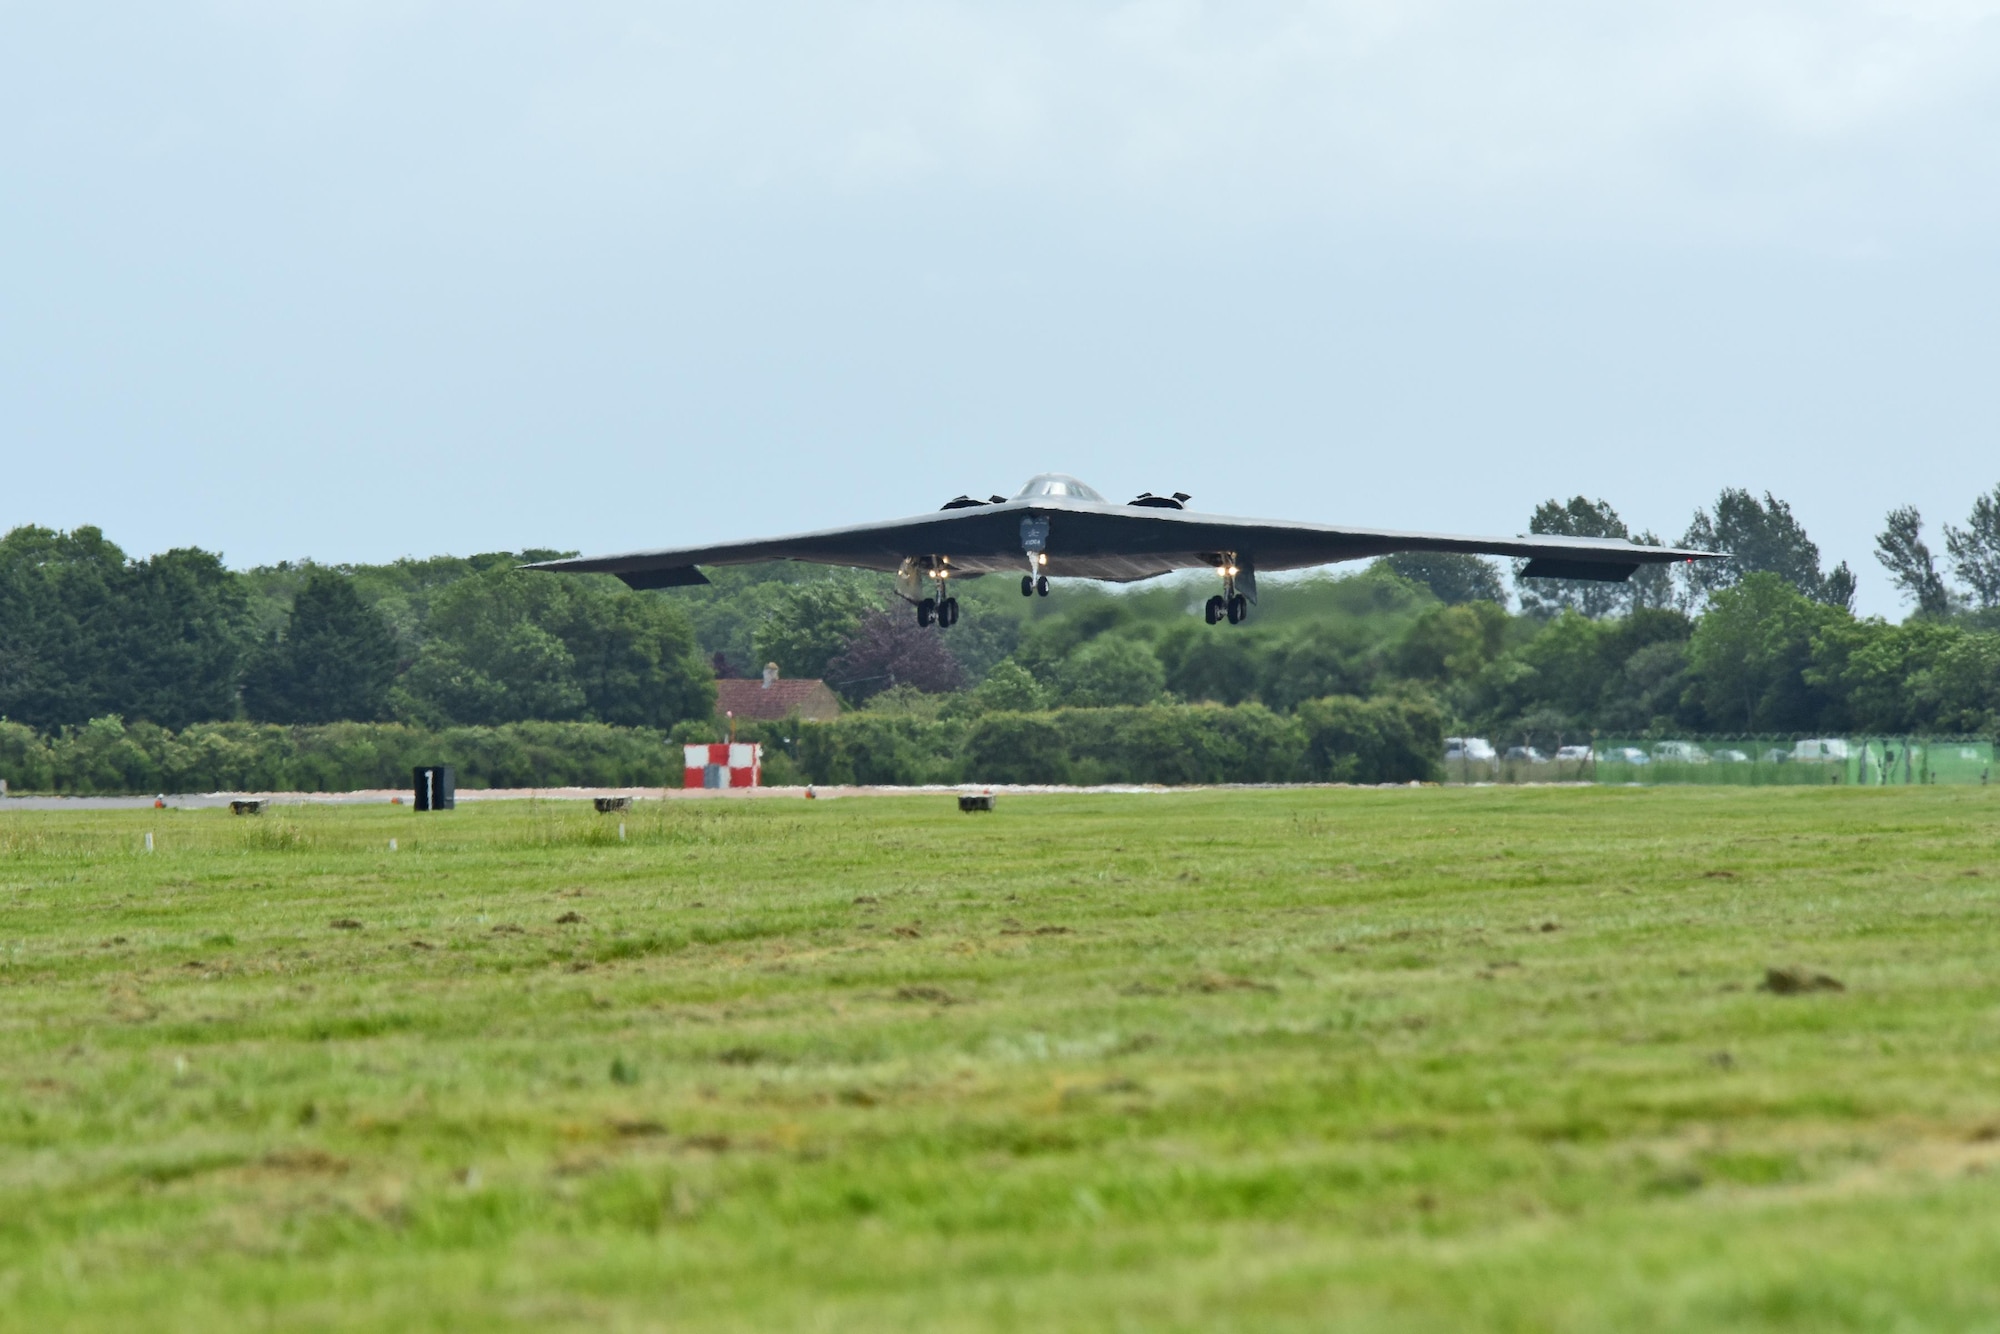 A B-2 Spirt deployed from Whiteman Air Force Base, Mo., approaches the runway at RAF Fairford, U.K., June 9, 2017. The B-2 routinely conducts bomber assurance and deterrence missions providing a flexible and vigilant long-range global strike capability, and is just one demonstration of the U.S. commitment to supporting global security. (U.S. Air Force photo by Tech. Sgt. Miguel Lara III)